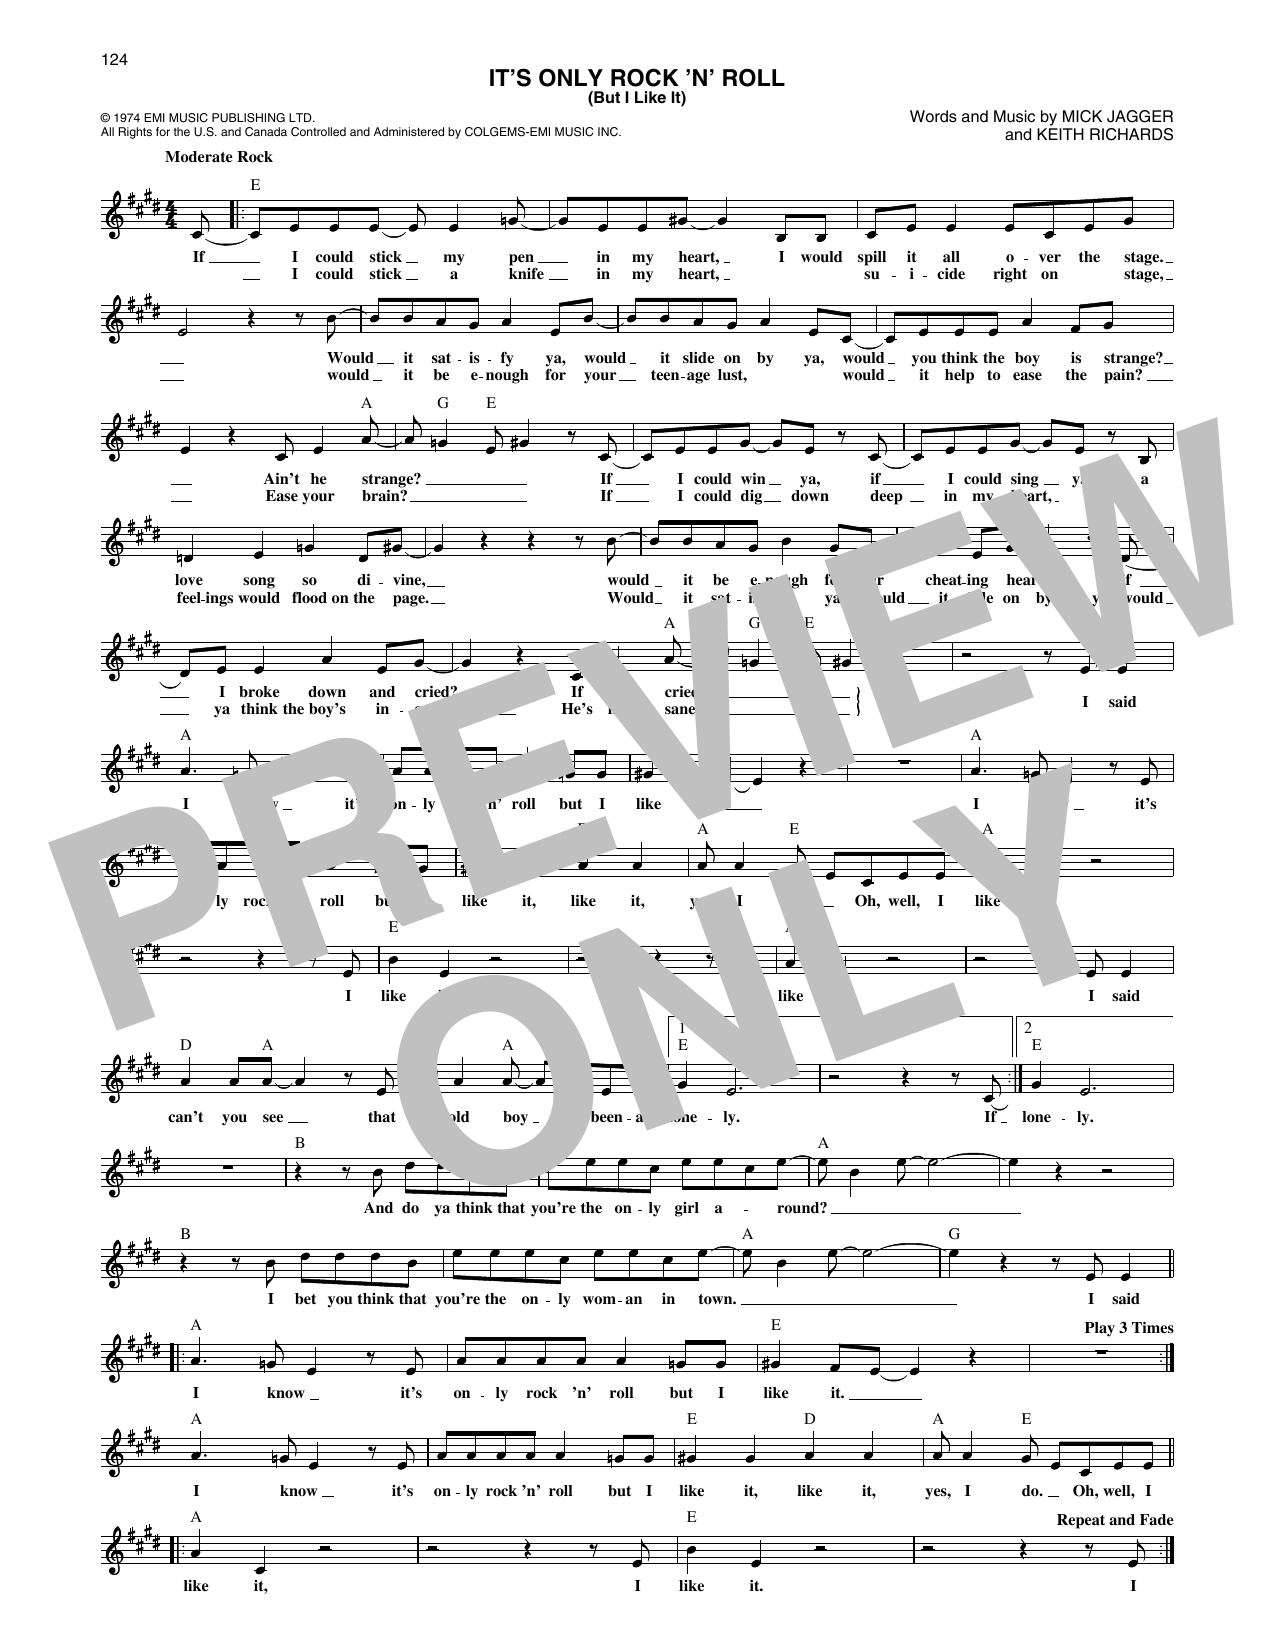 Download The Rolling Stones It's Only Rock 'N' Roll (But I Like It) Sheet Music